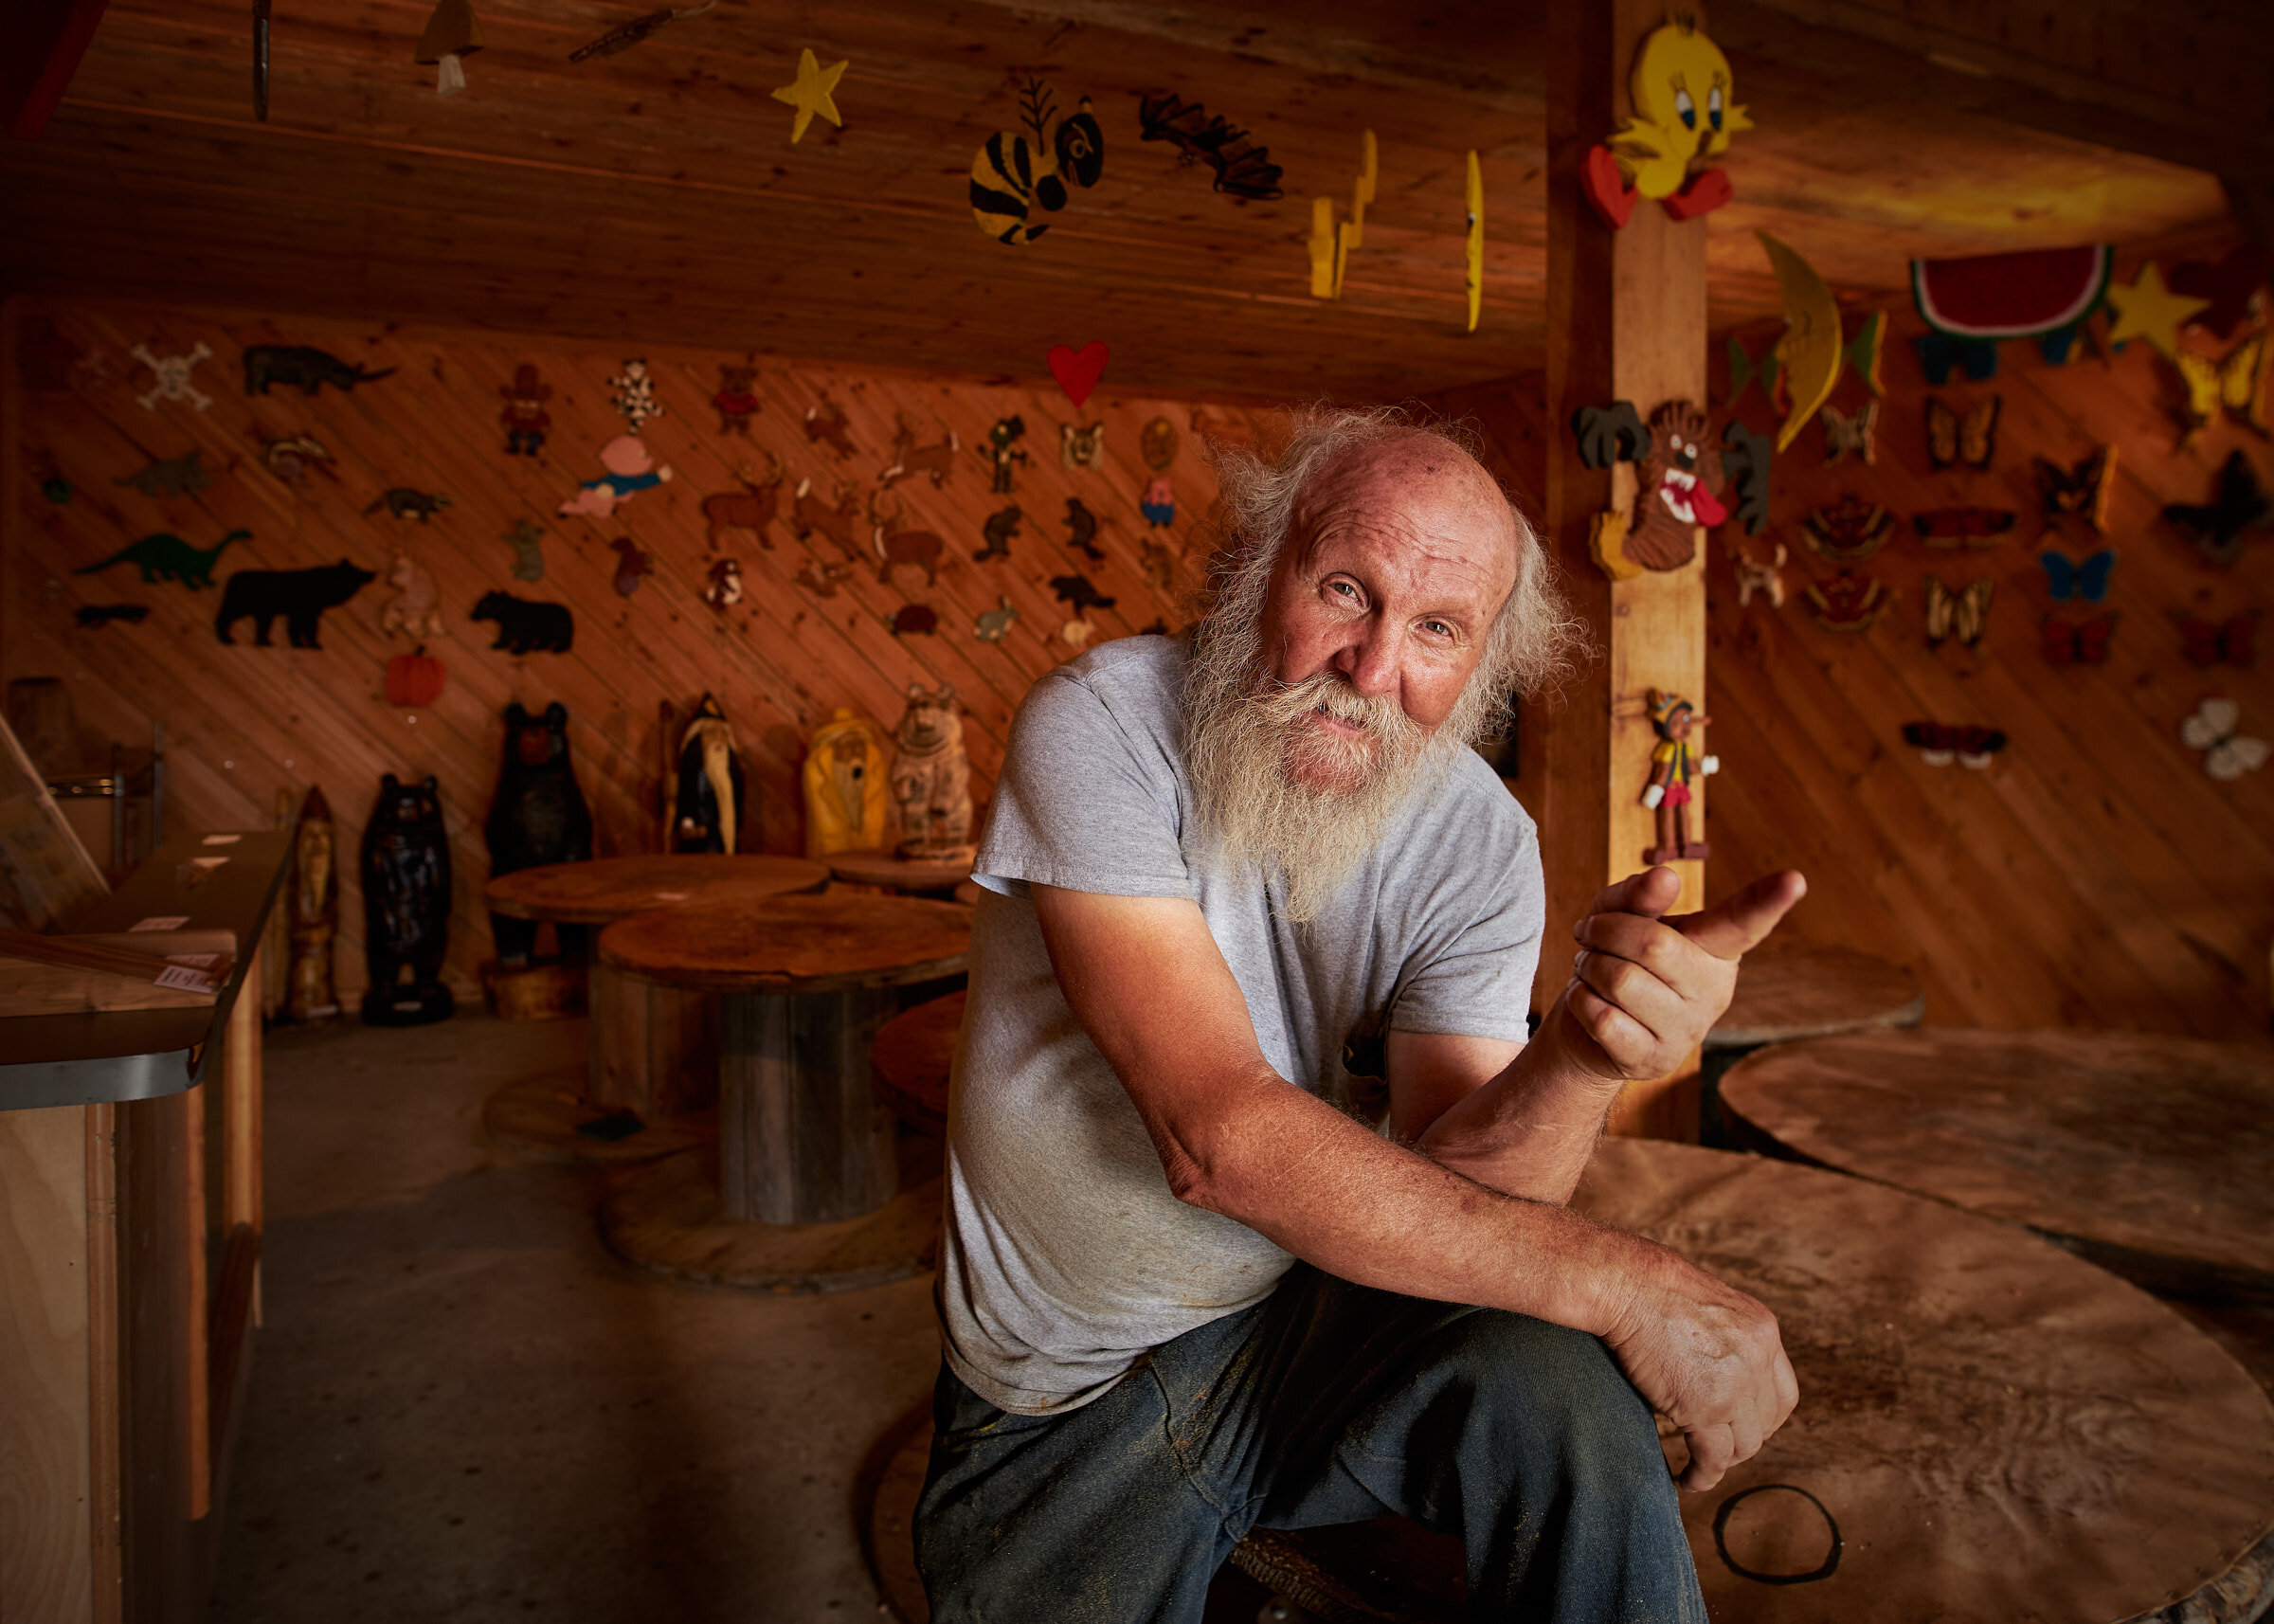  Portrait of Ray Murphy , "The Chainsaw Sawyer Artist" and "The Founder of Chainsaw Art" at his shop in Hancock, Maine. Image © Matthew Rakola 